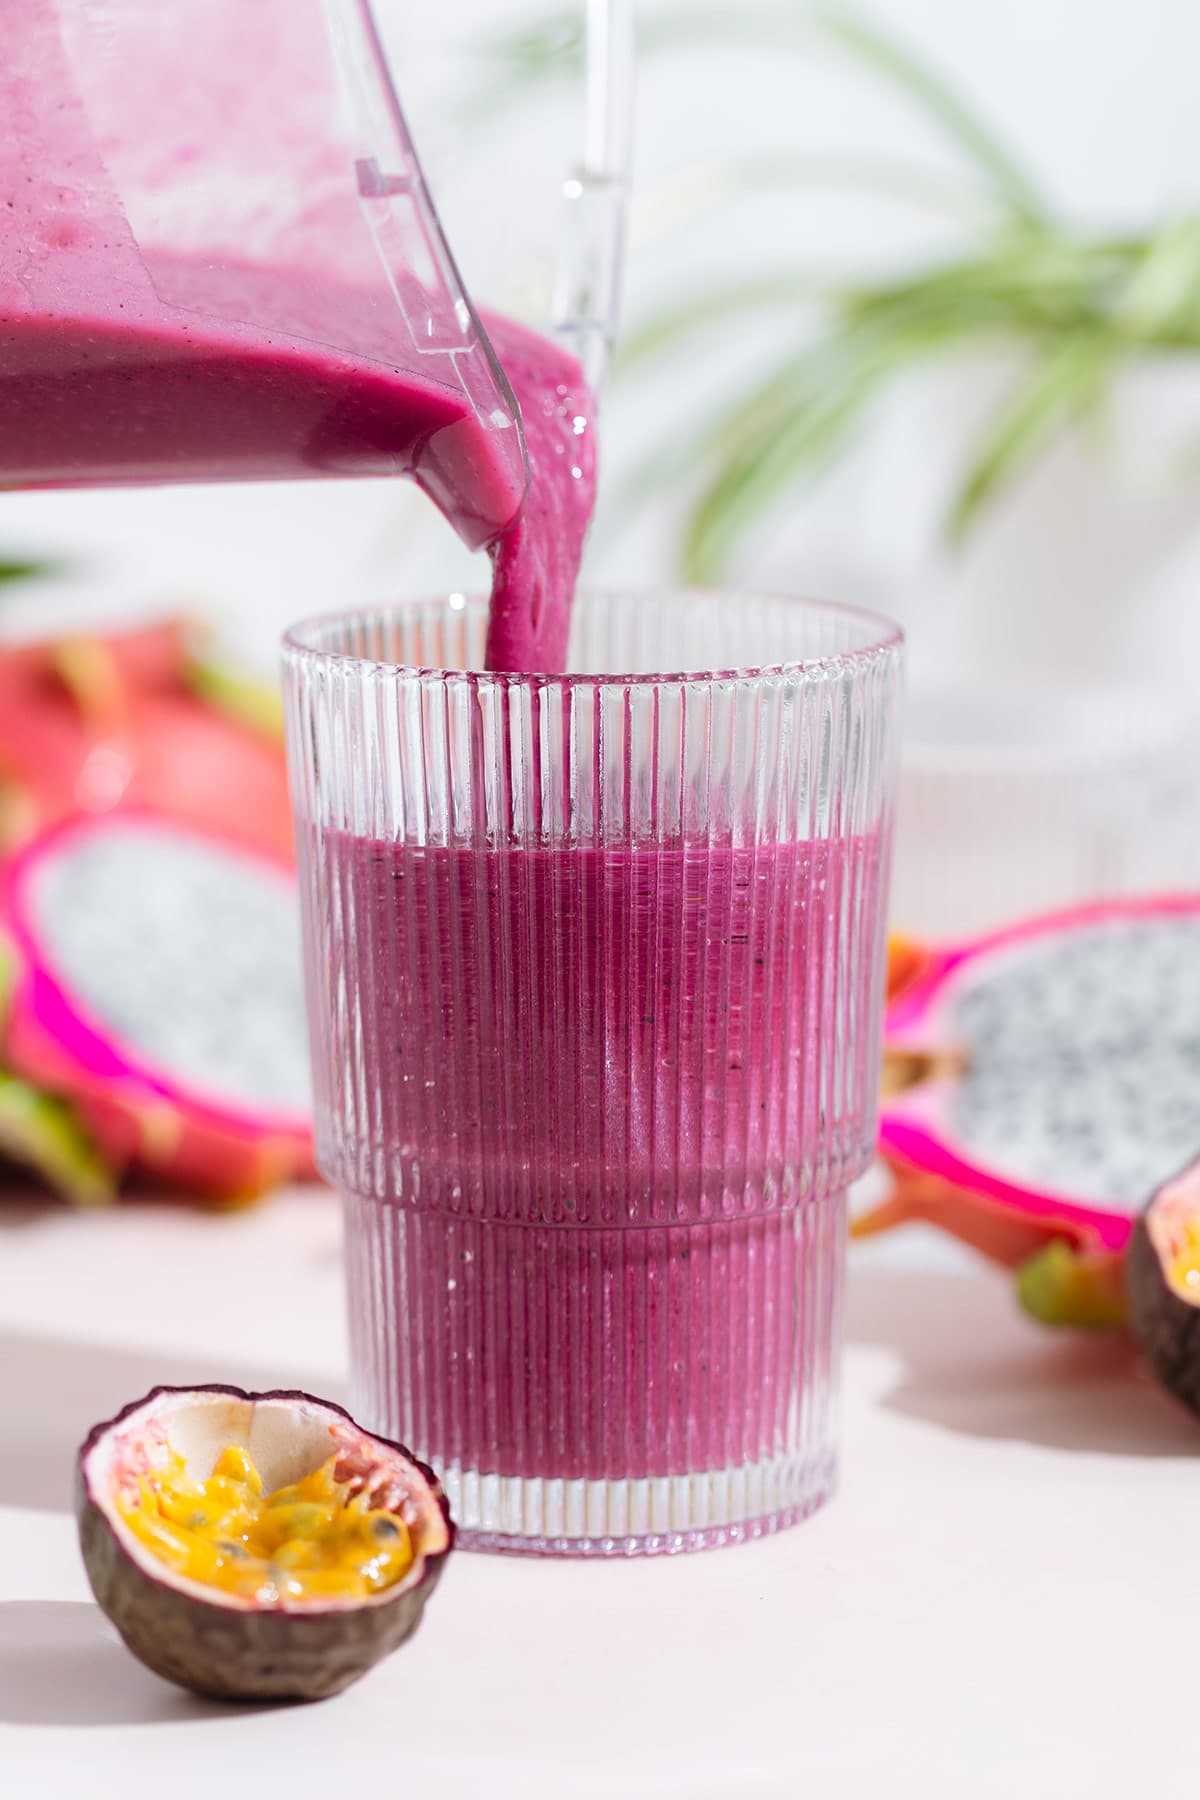 Bright purple dragon fruit garnished being poured into a tall glass from a high-speed blender.